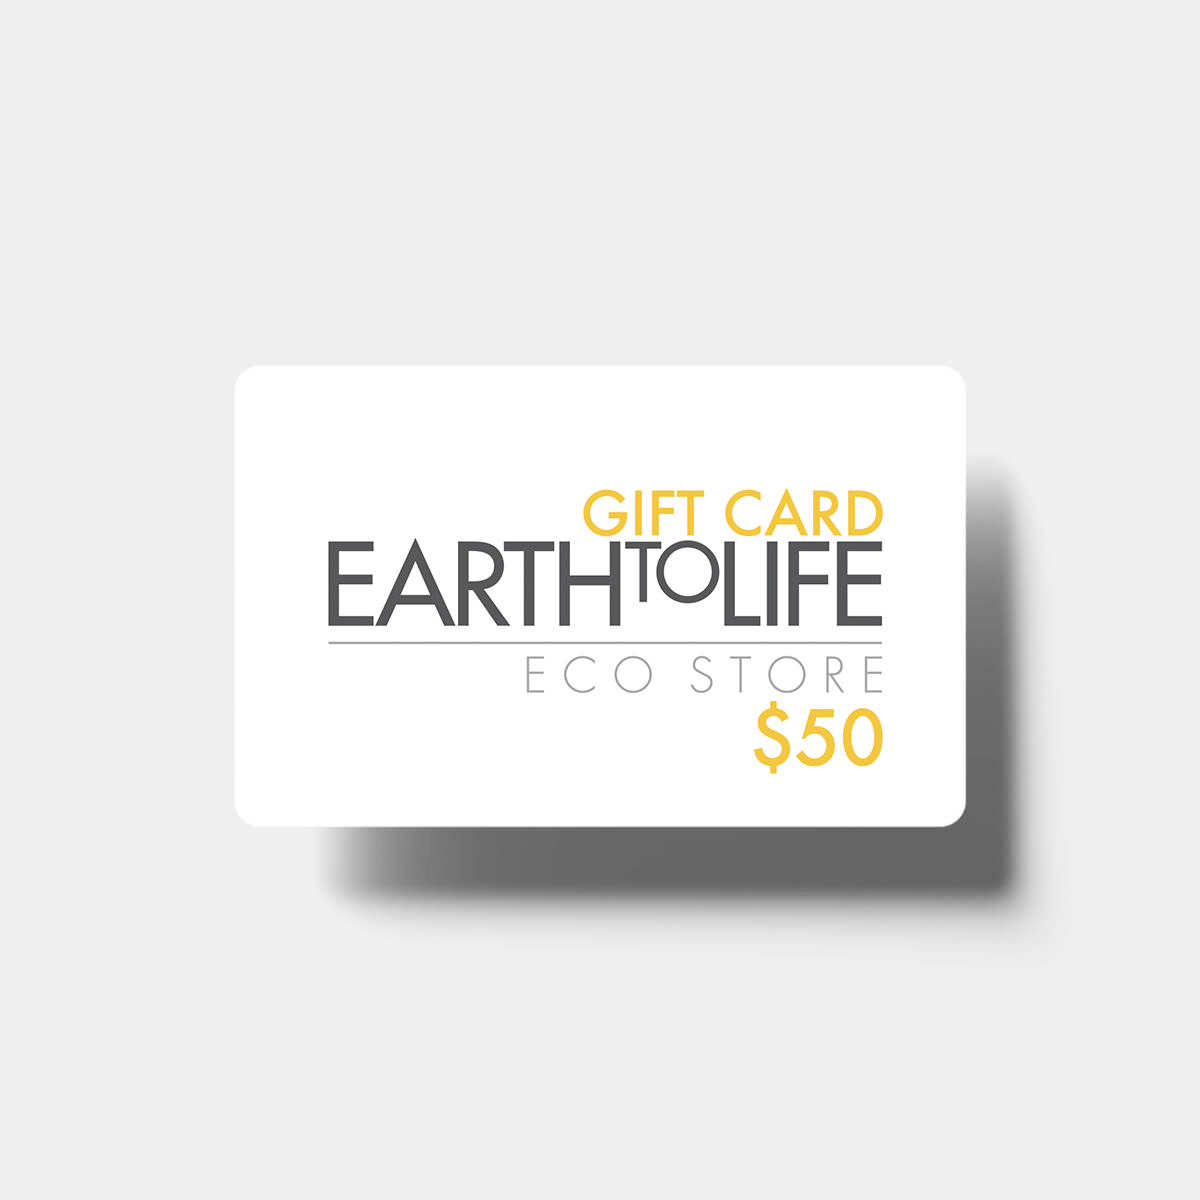 Earth to Life Gift Card Gift Cards Earth to Life $50.00 